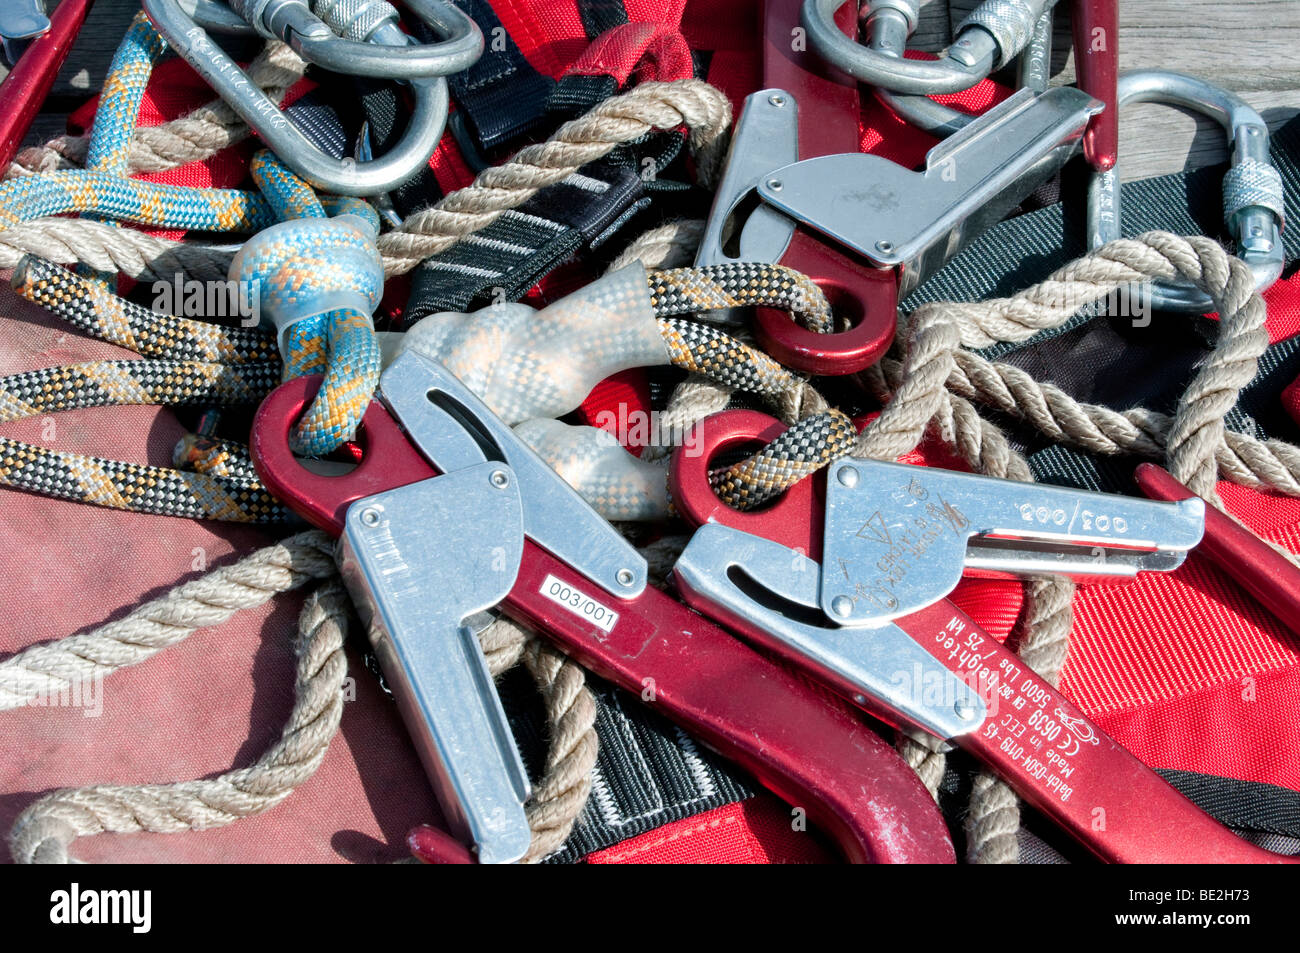 RAG Rope Access Gear for rope Rescue work Stock Photo - Alamy